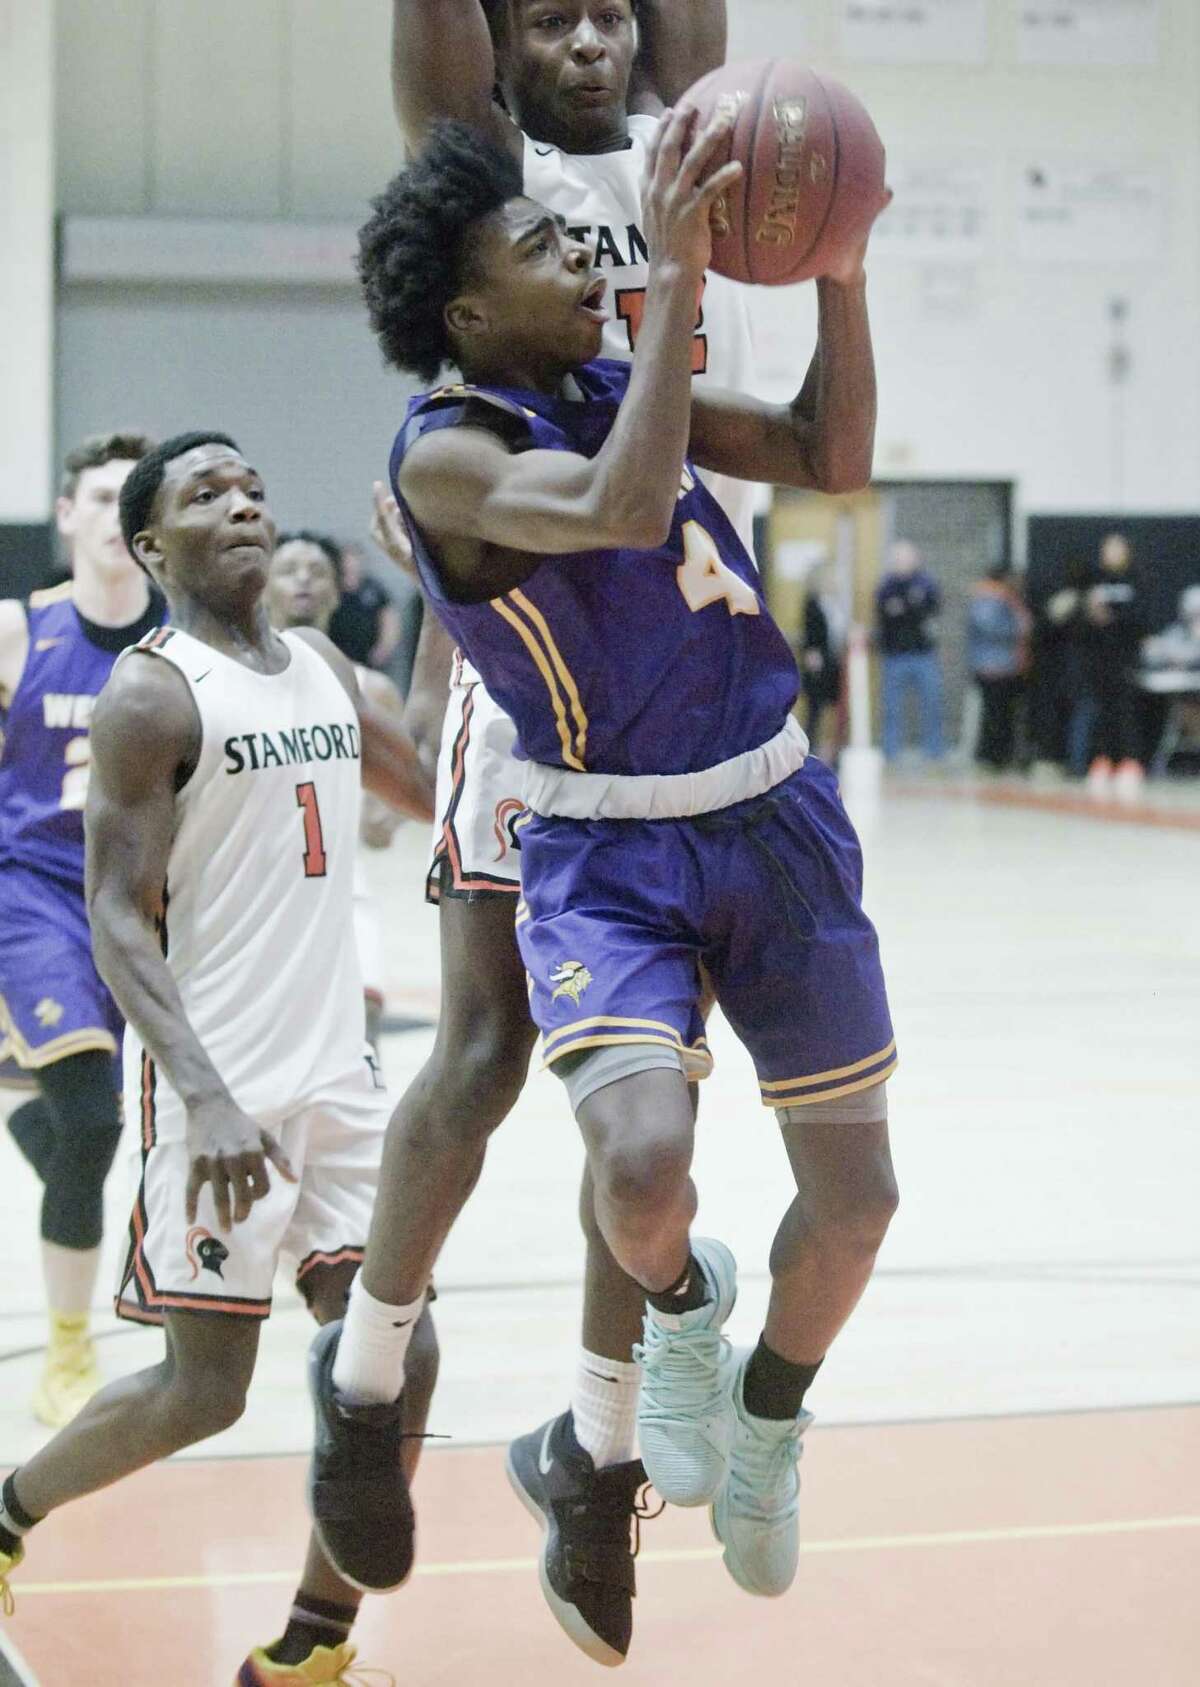 Westhill High School's JeySon Slade tries to get a shot off in a game against Stamford High School, played at Stamford High School. Saturday, Jan. 19, 2019